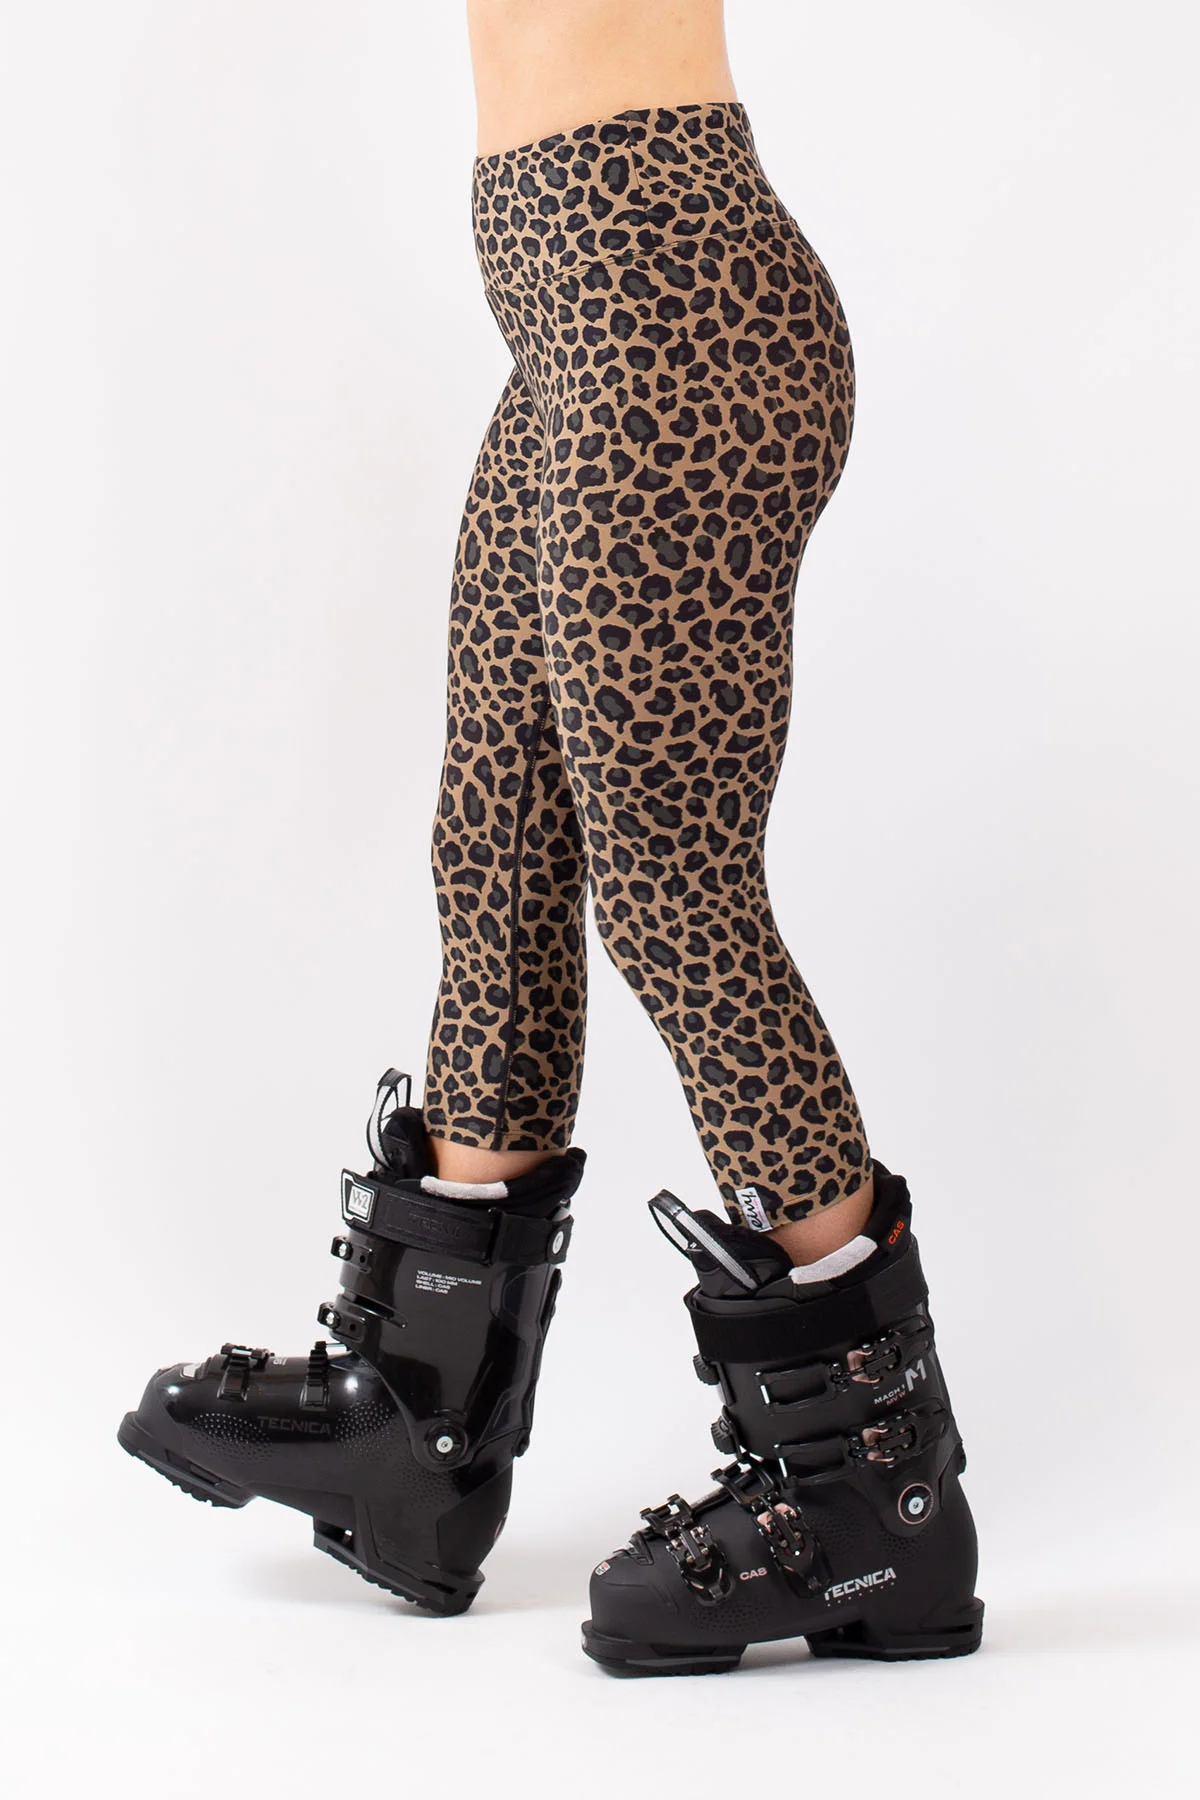 Icecold 3/4 Tights - Leopard | XL